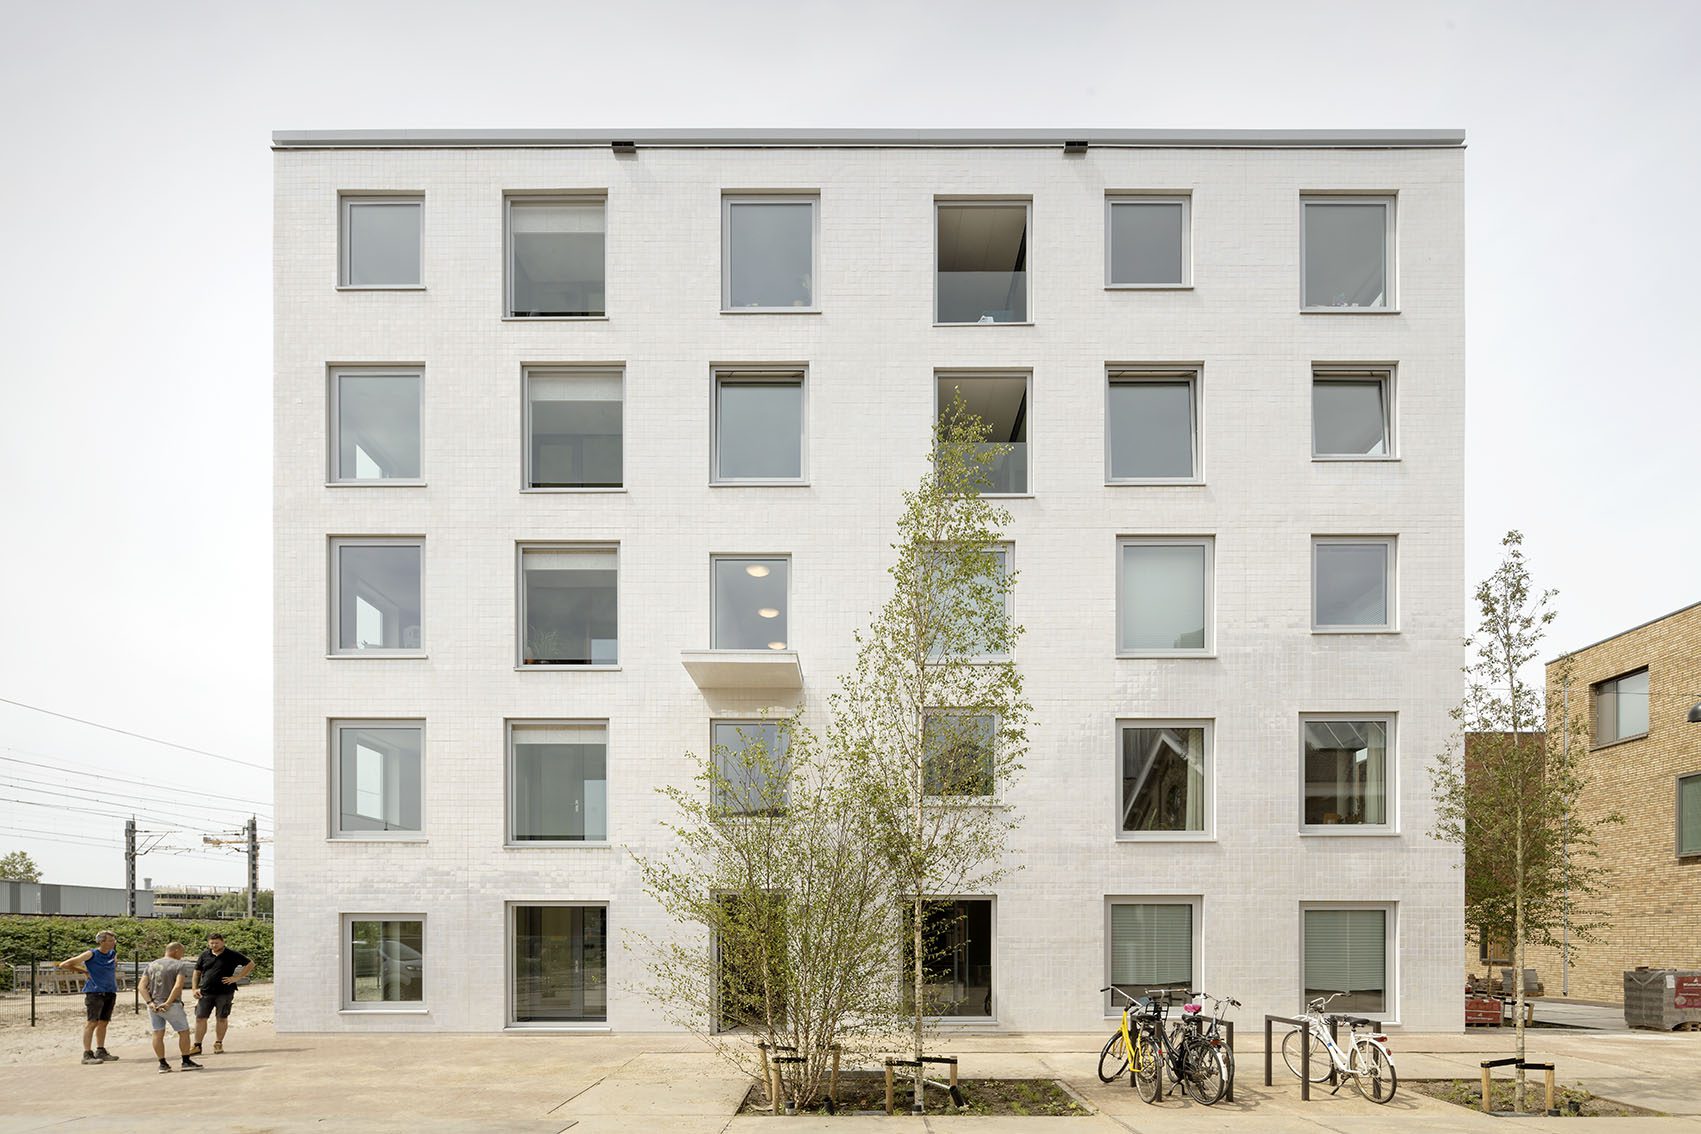 Wisselspoor - Wisselspoor apartment building nacre mother of pearl - a project by Space Encounters Office for Architecture